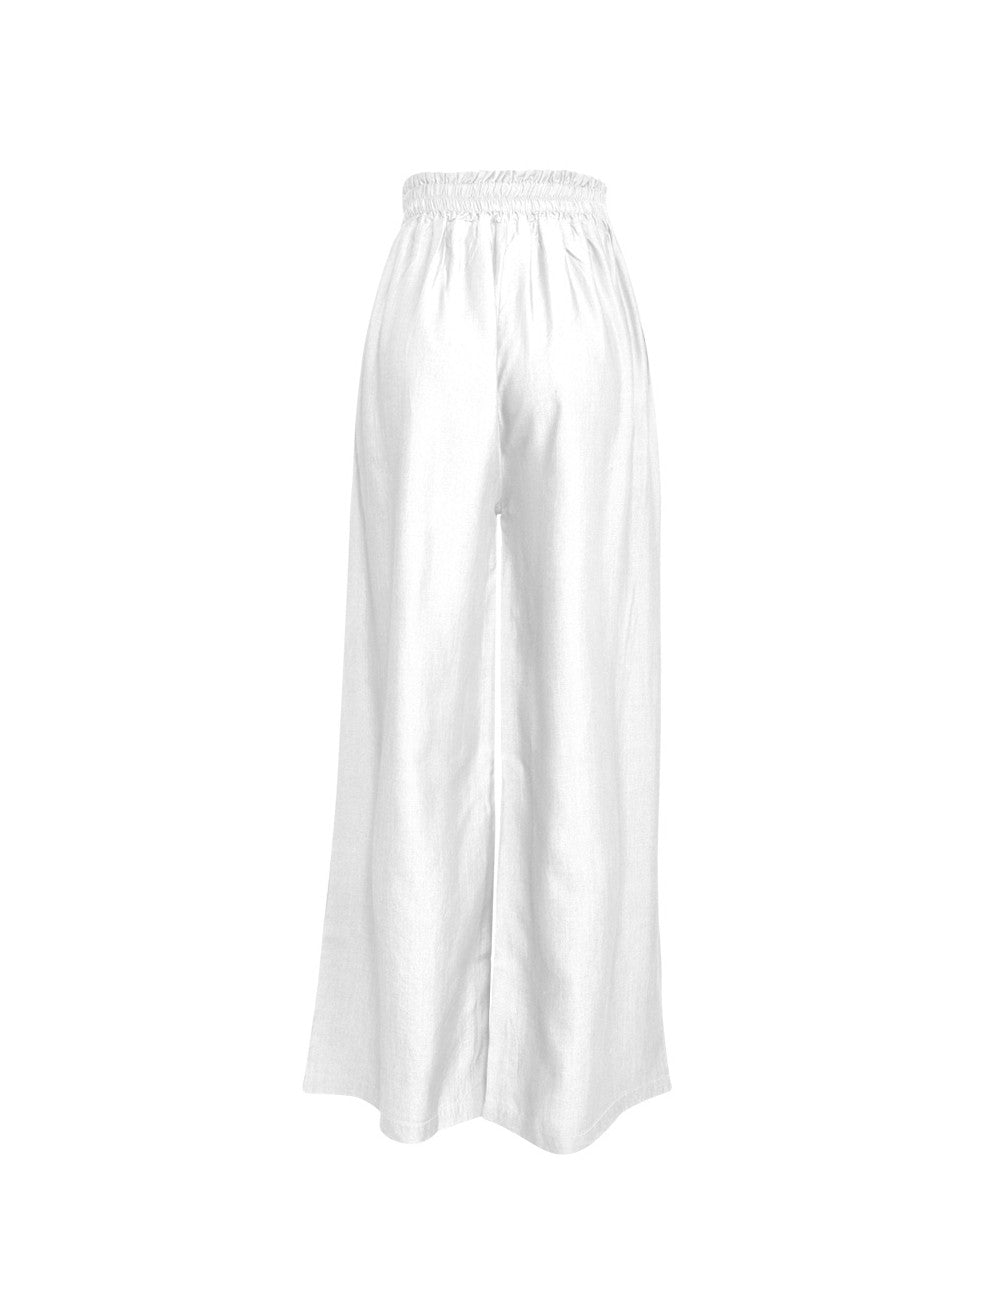 White loose trousers from the Isla line by Verdissima from Italy